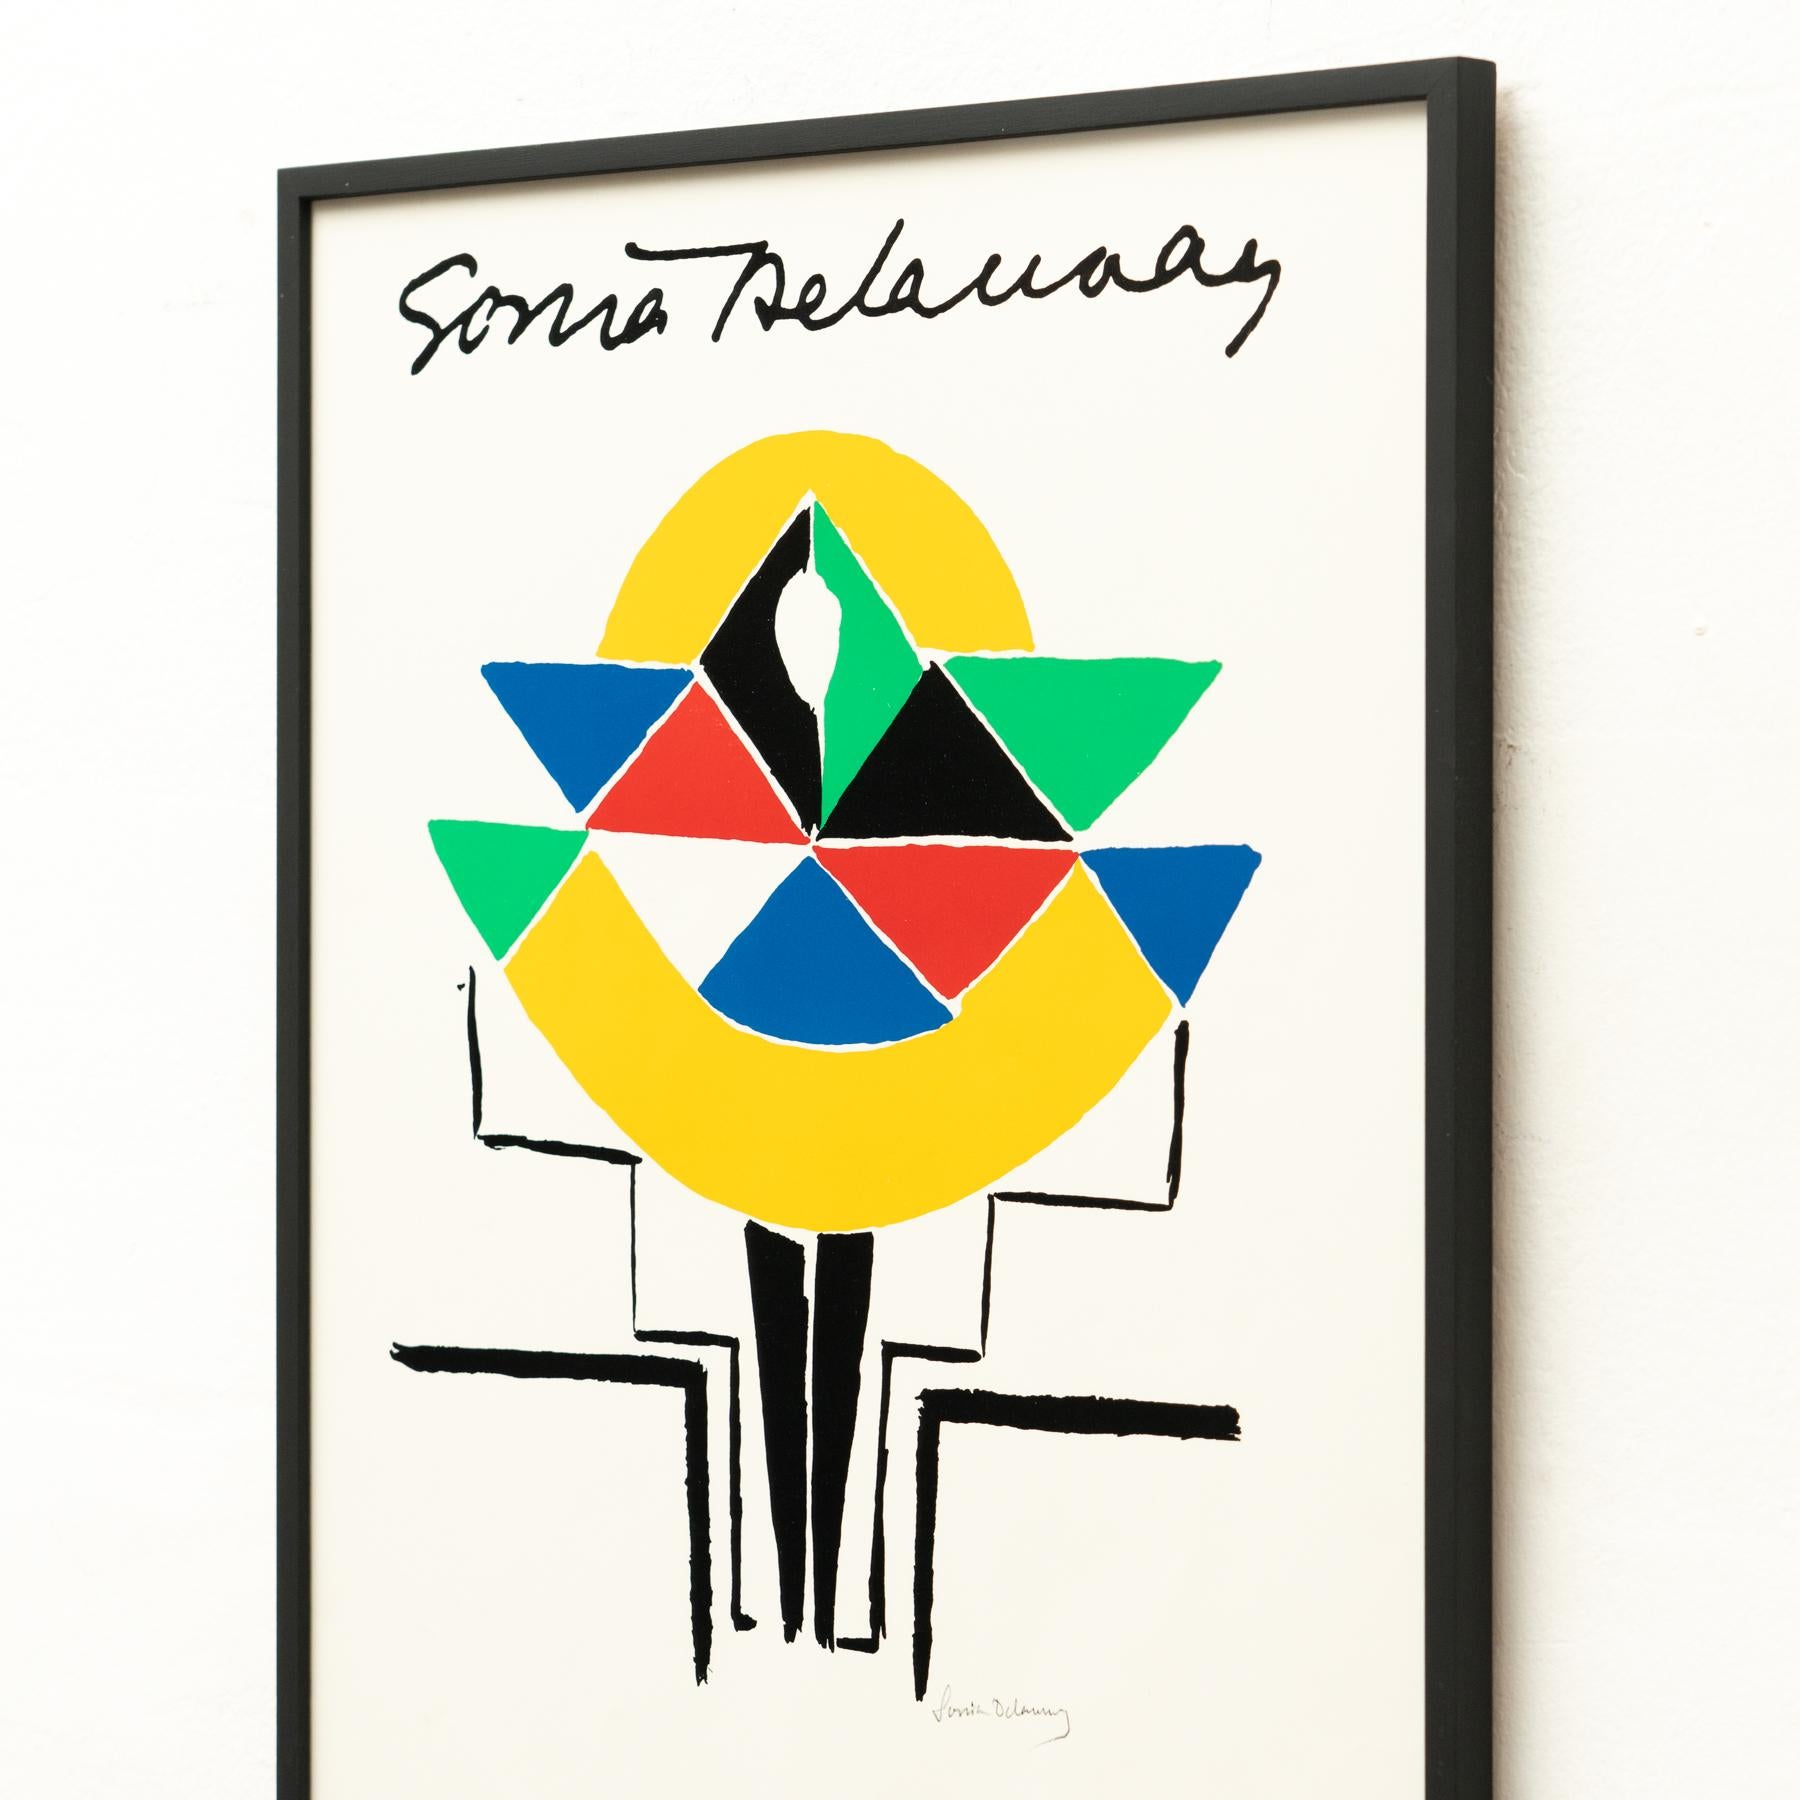 Framed Sonia Delaunay Lithography For Sale 3